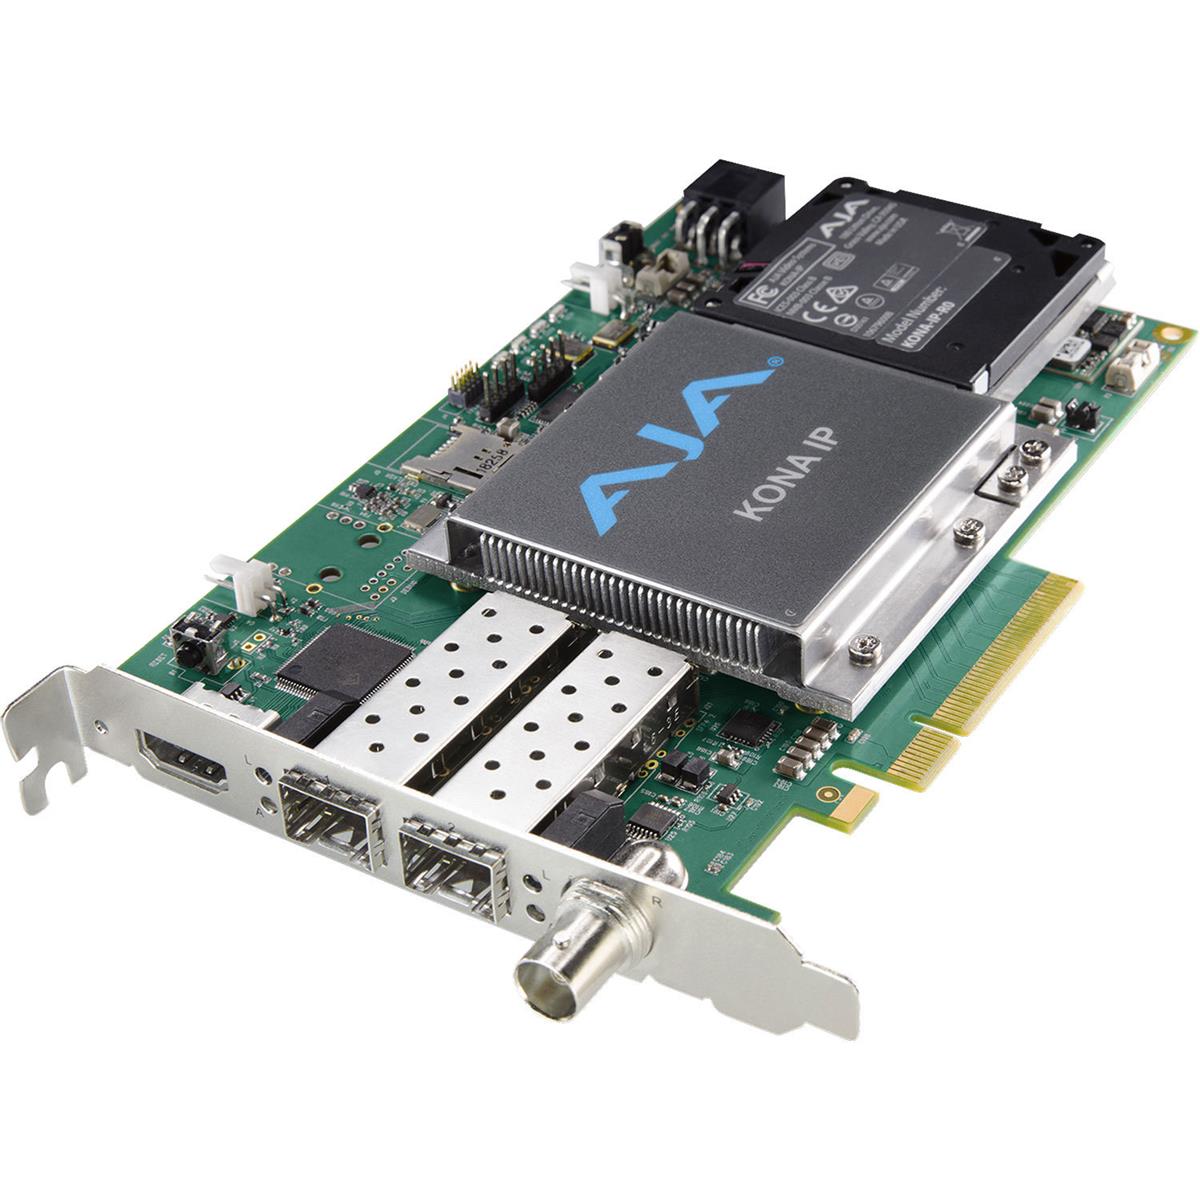 Image of AJA KONA IP Video/Audio I/O Card with 8-Lane PCIe 2.0 and HDMI Monitoring Output